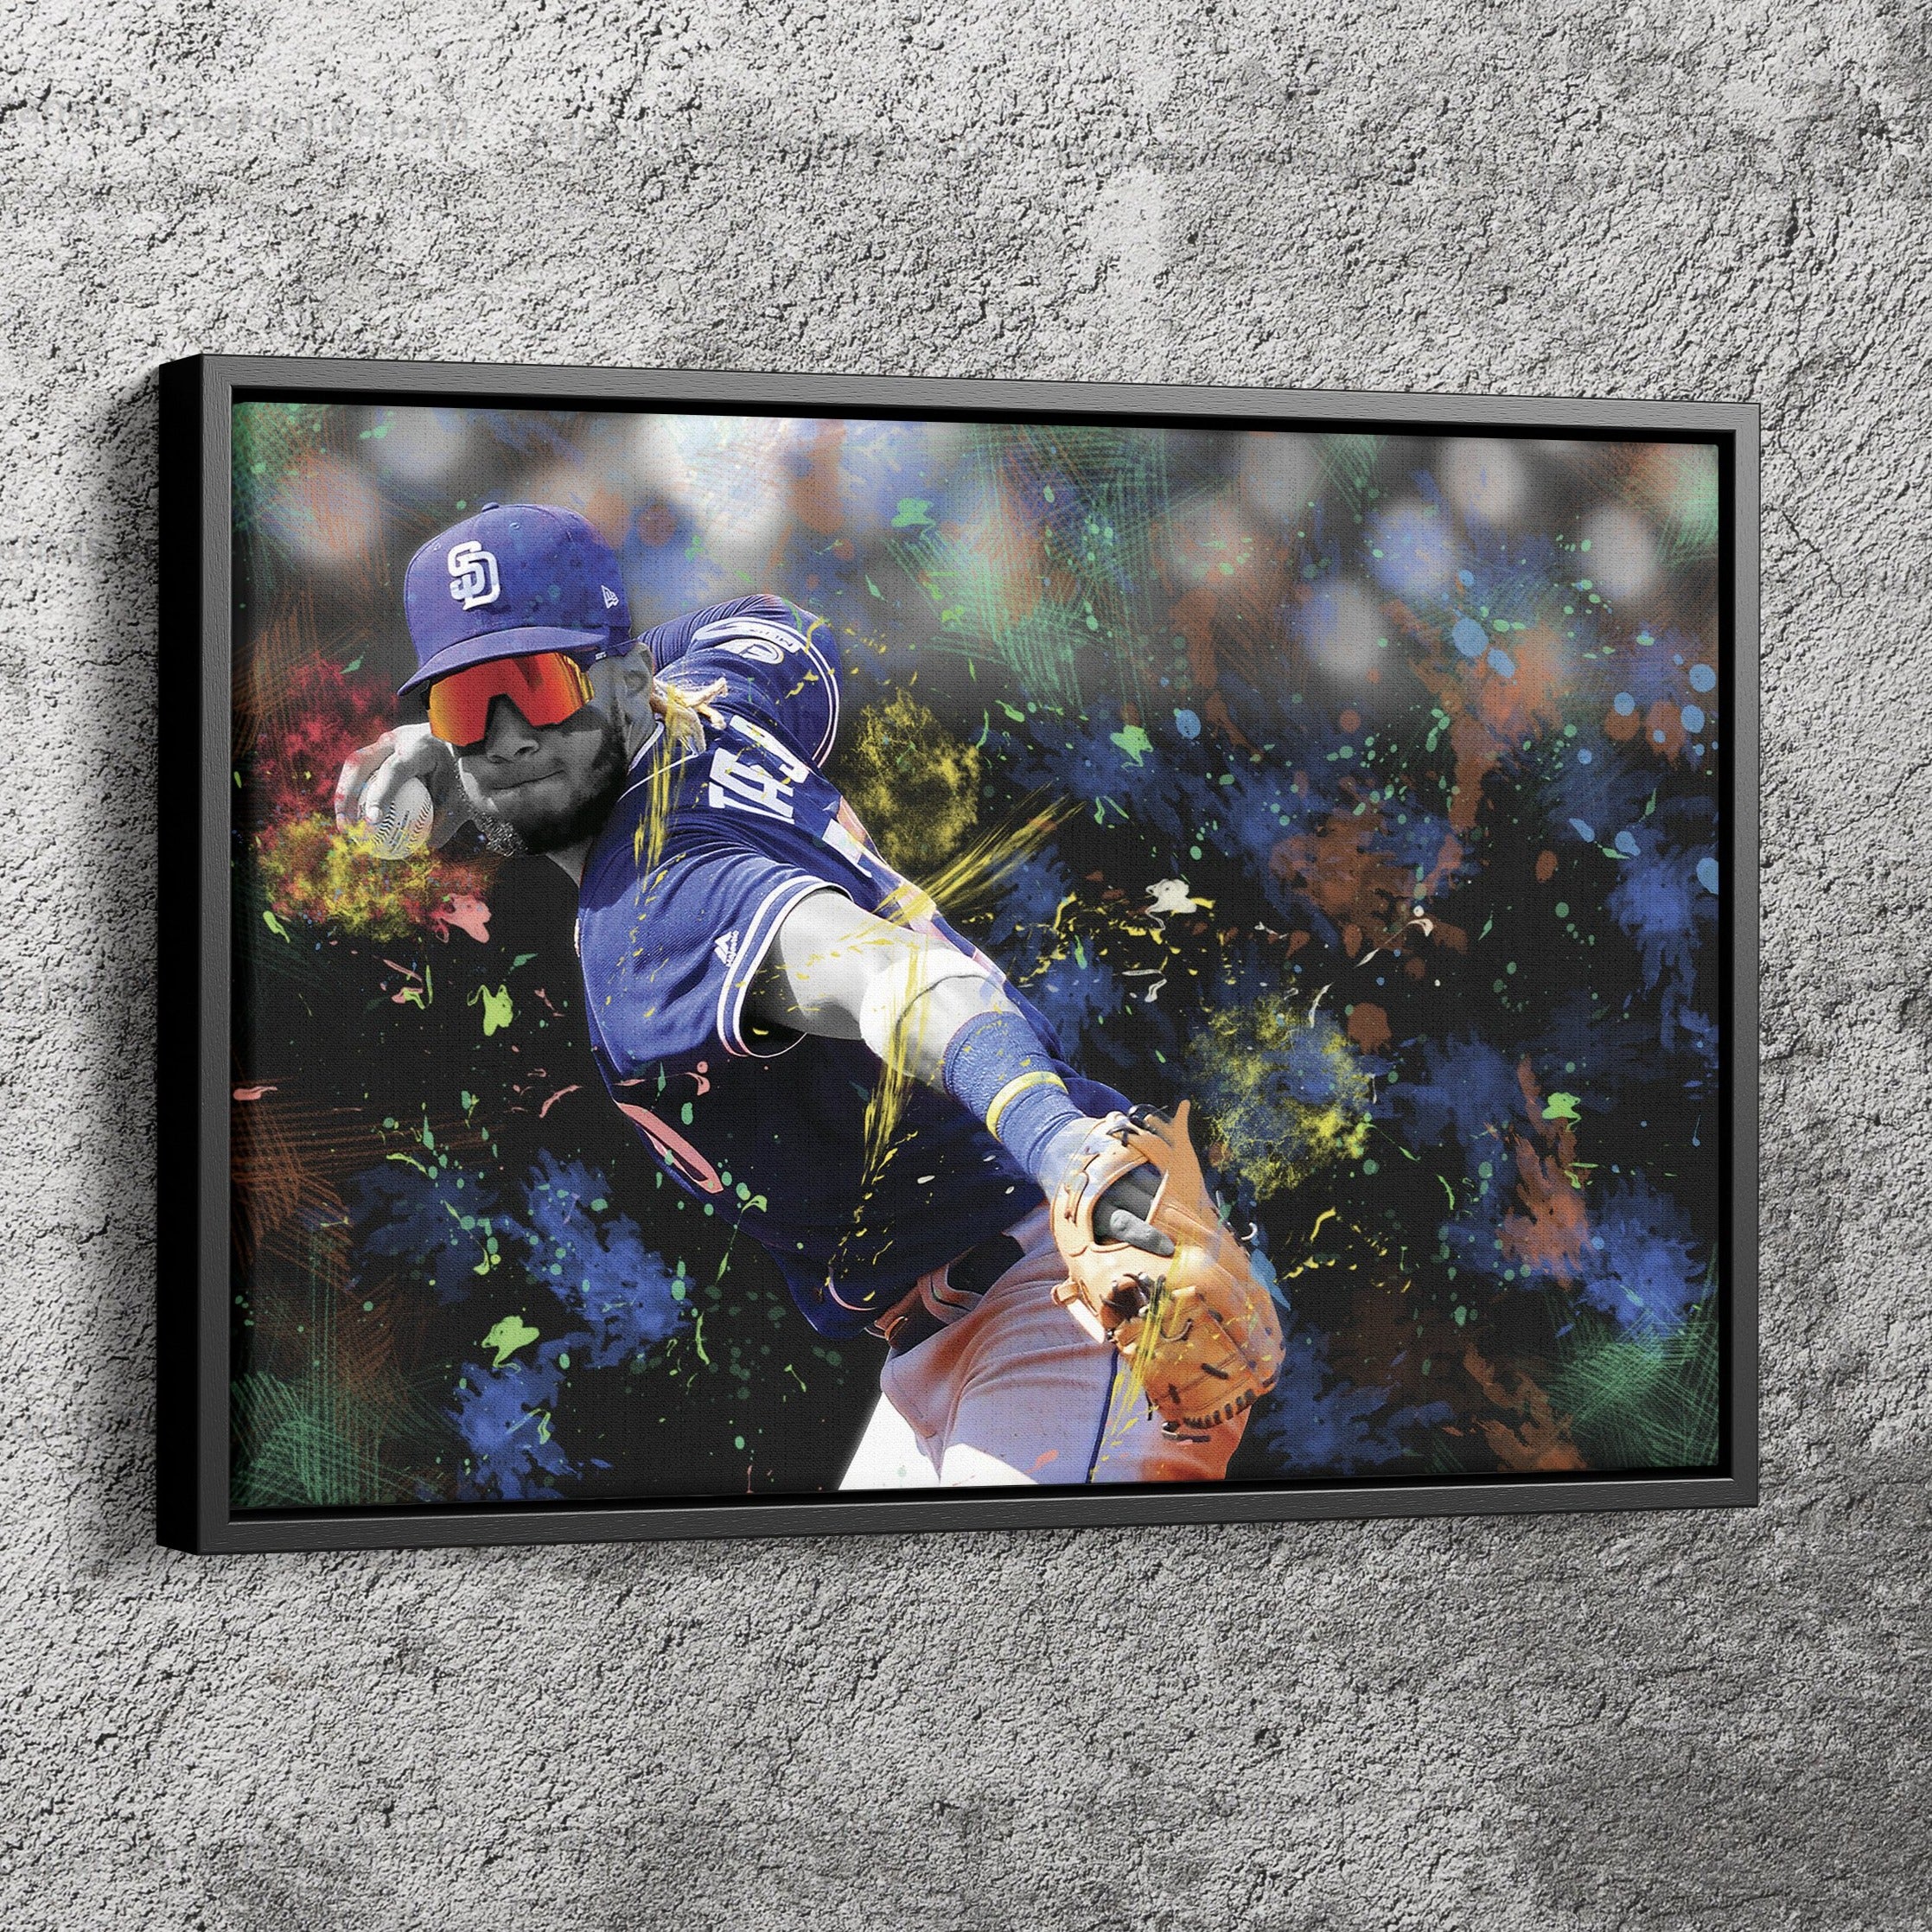 SMARTZONE Professional Baseball Players Tatis Jr. Wall Room Poster - Water  Resistant Poster (Size: 20 x 30)